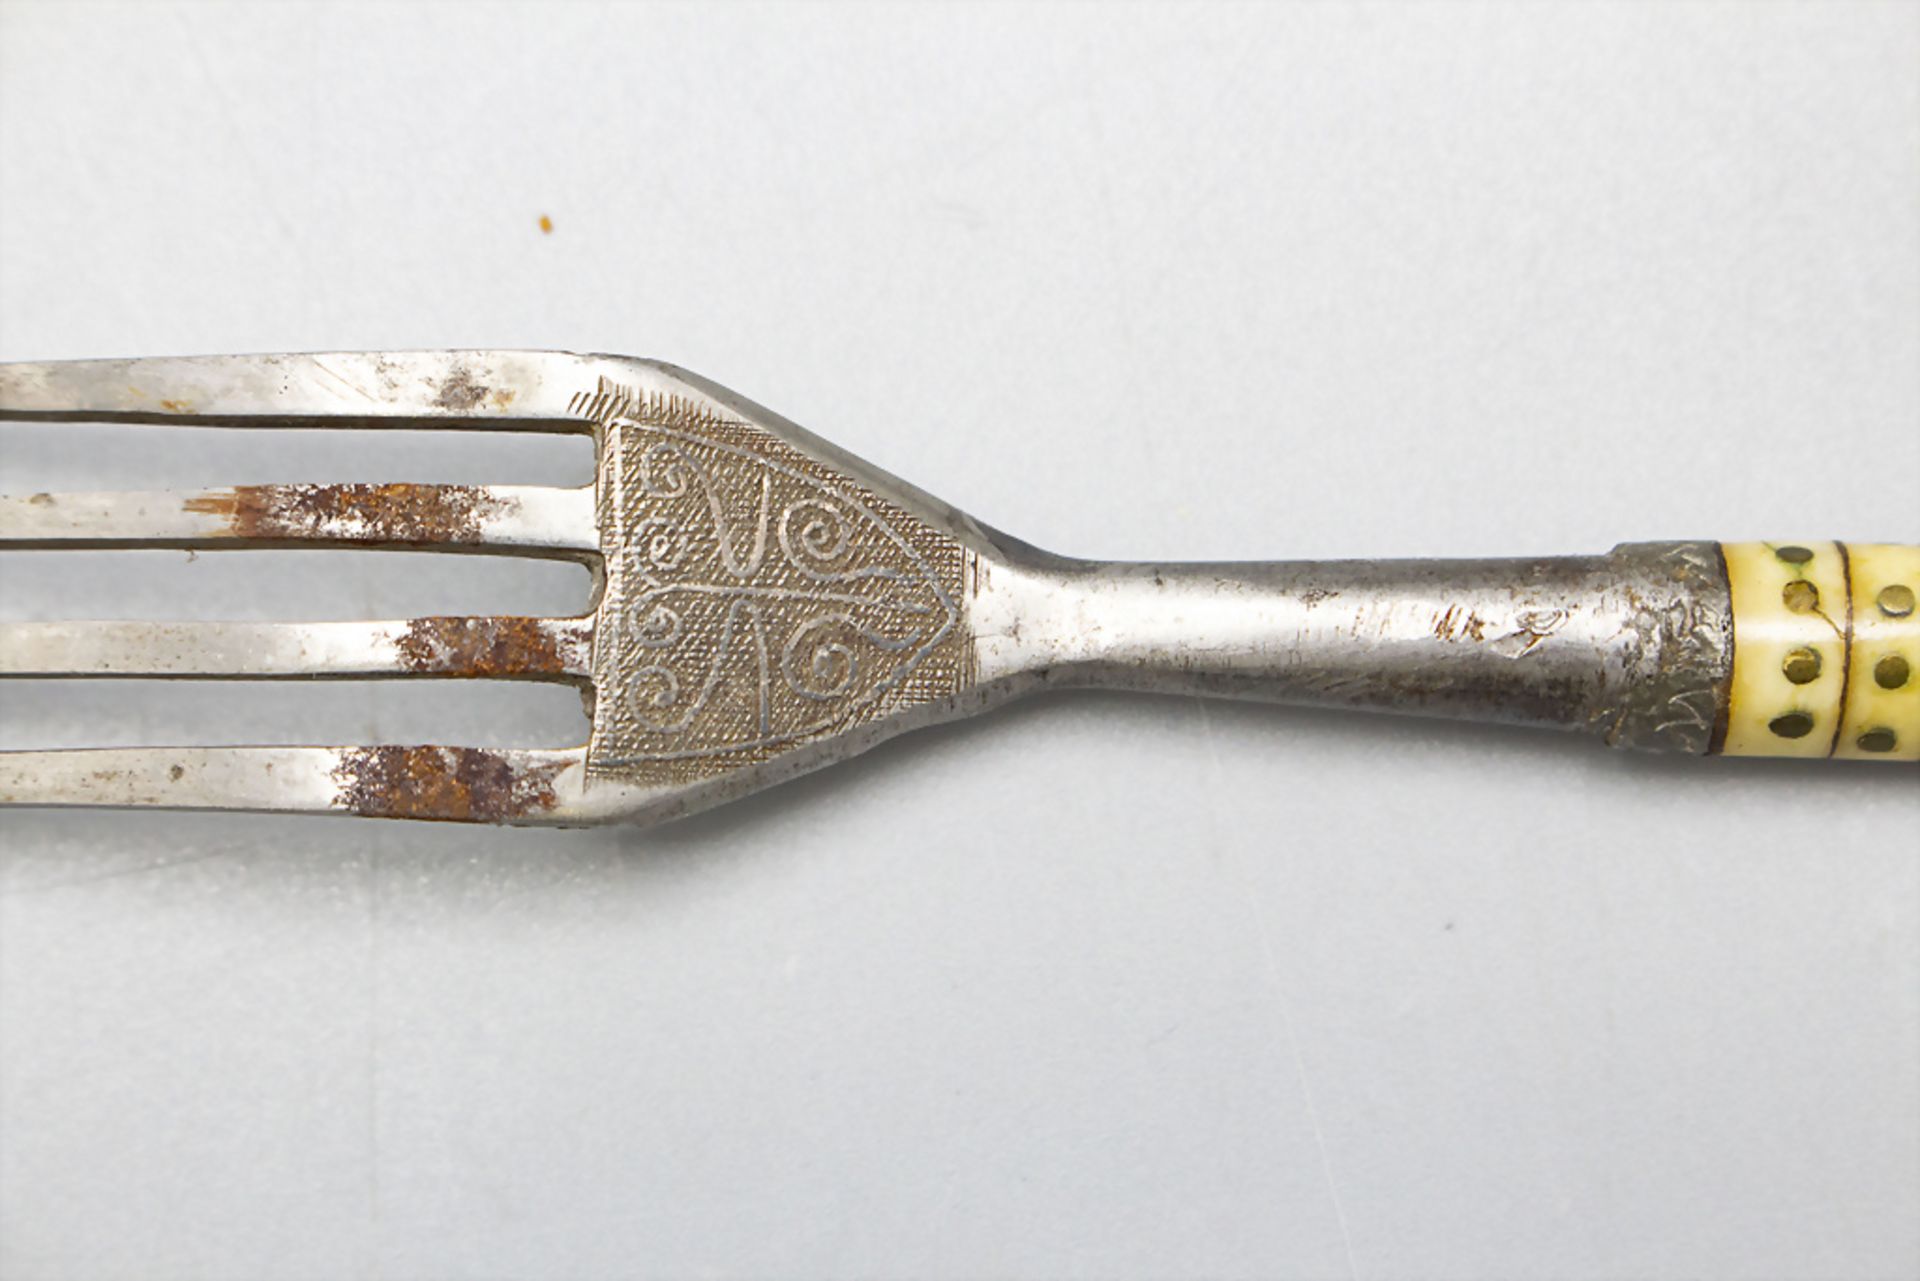 Barock Besteck / A Baroque fork and knife, 18. Jh. - Image 4 of 6